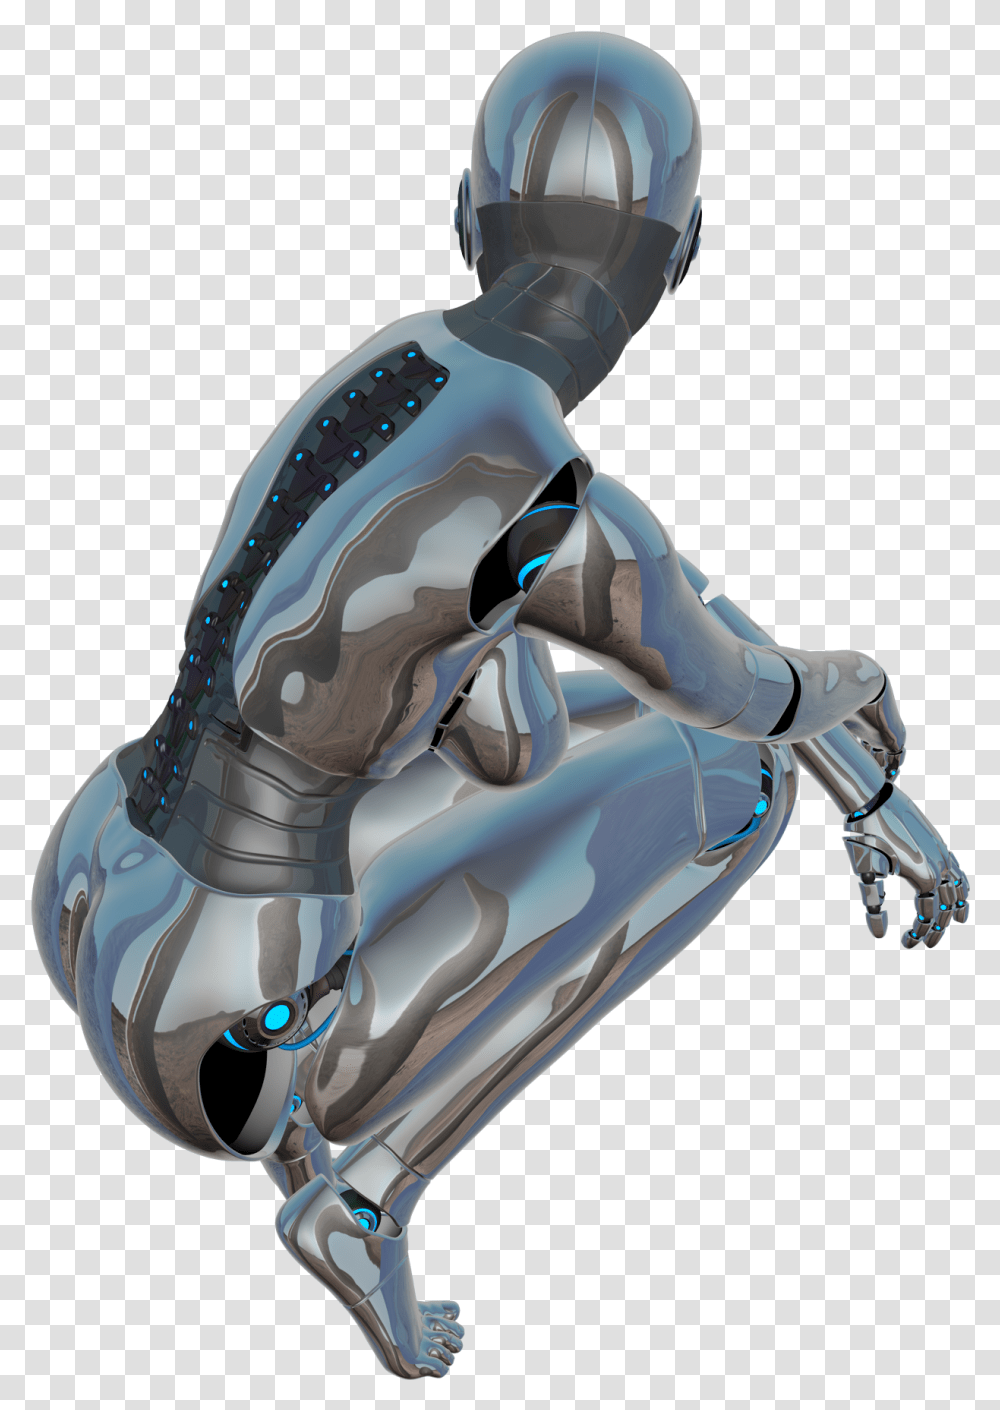 Clipart Of Posing Cyborg Girl Free Image Android Robot Girl, Helmet, Clothing, Apparel Transparent Png